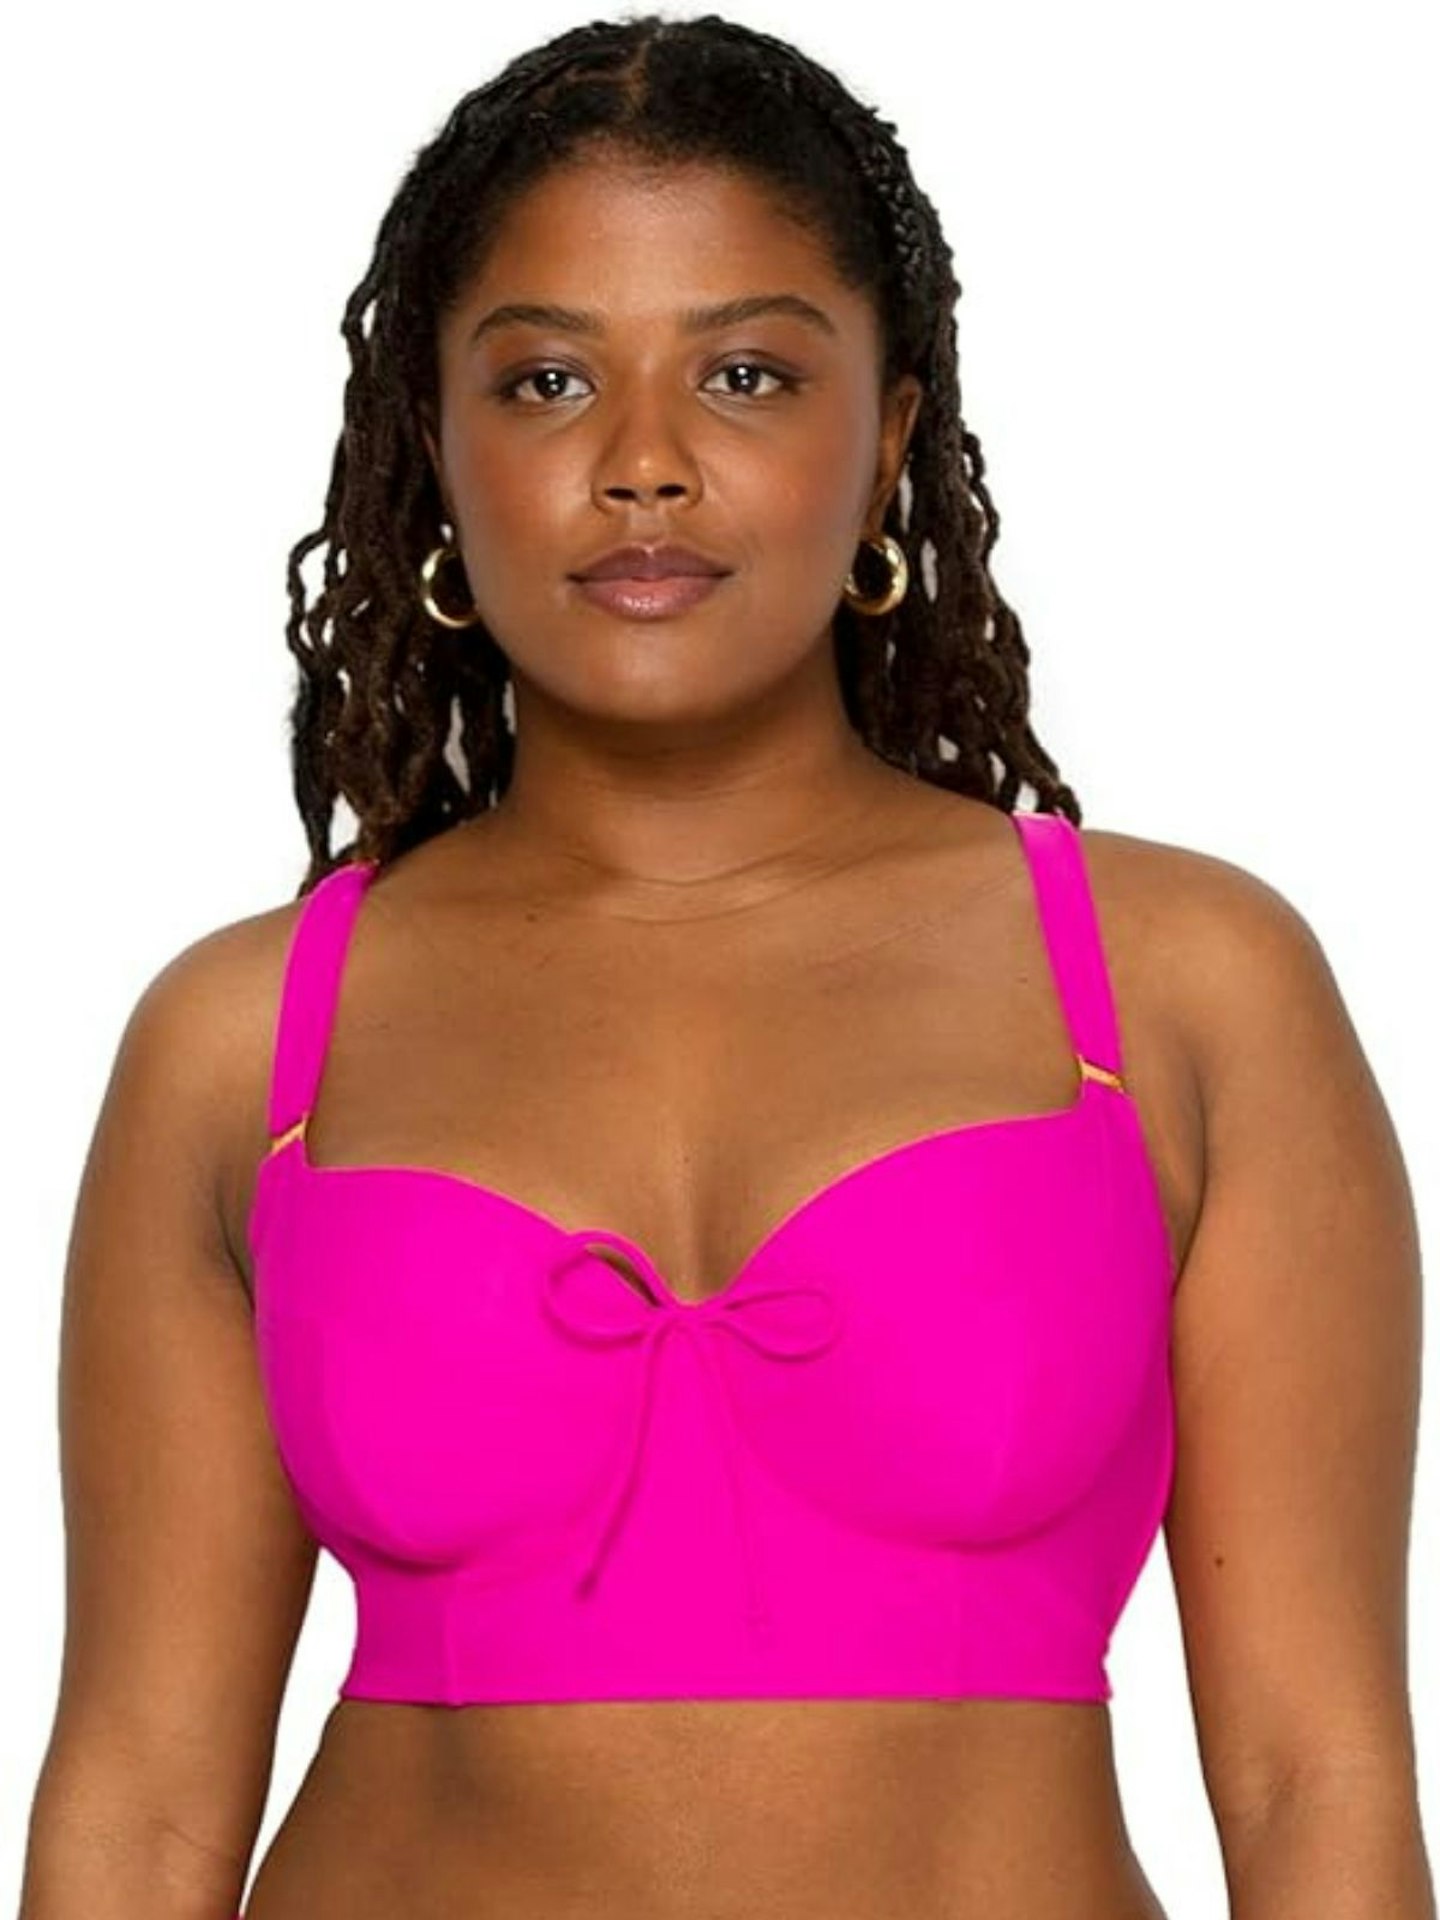 Smart & Sexy Full-Busted Underwire Swimsuit Bikini Top